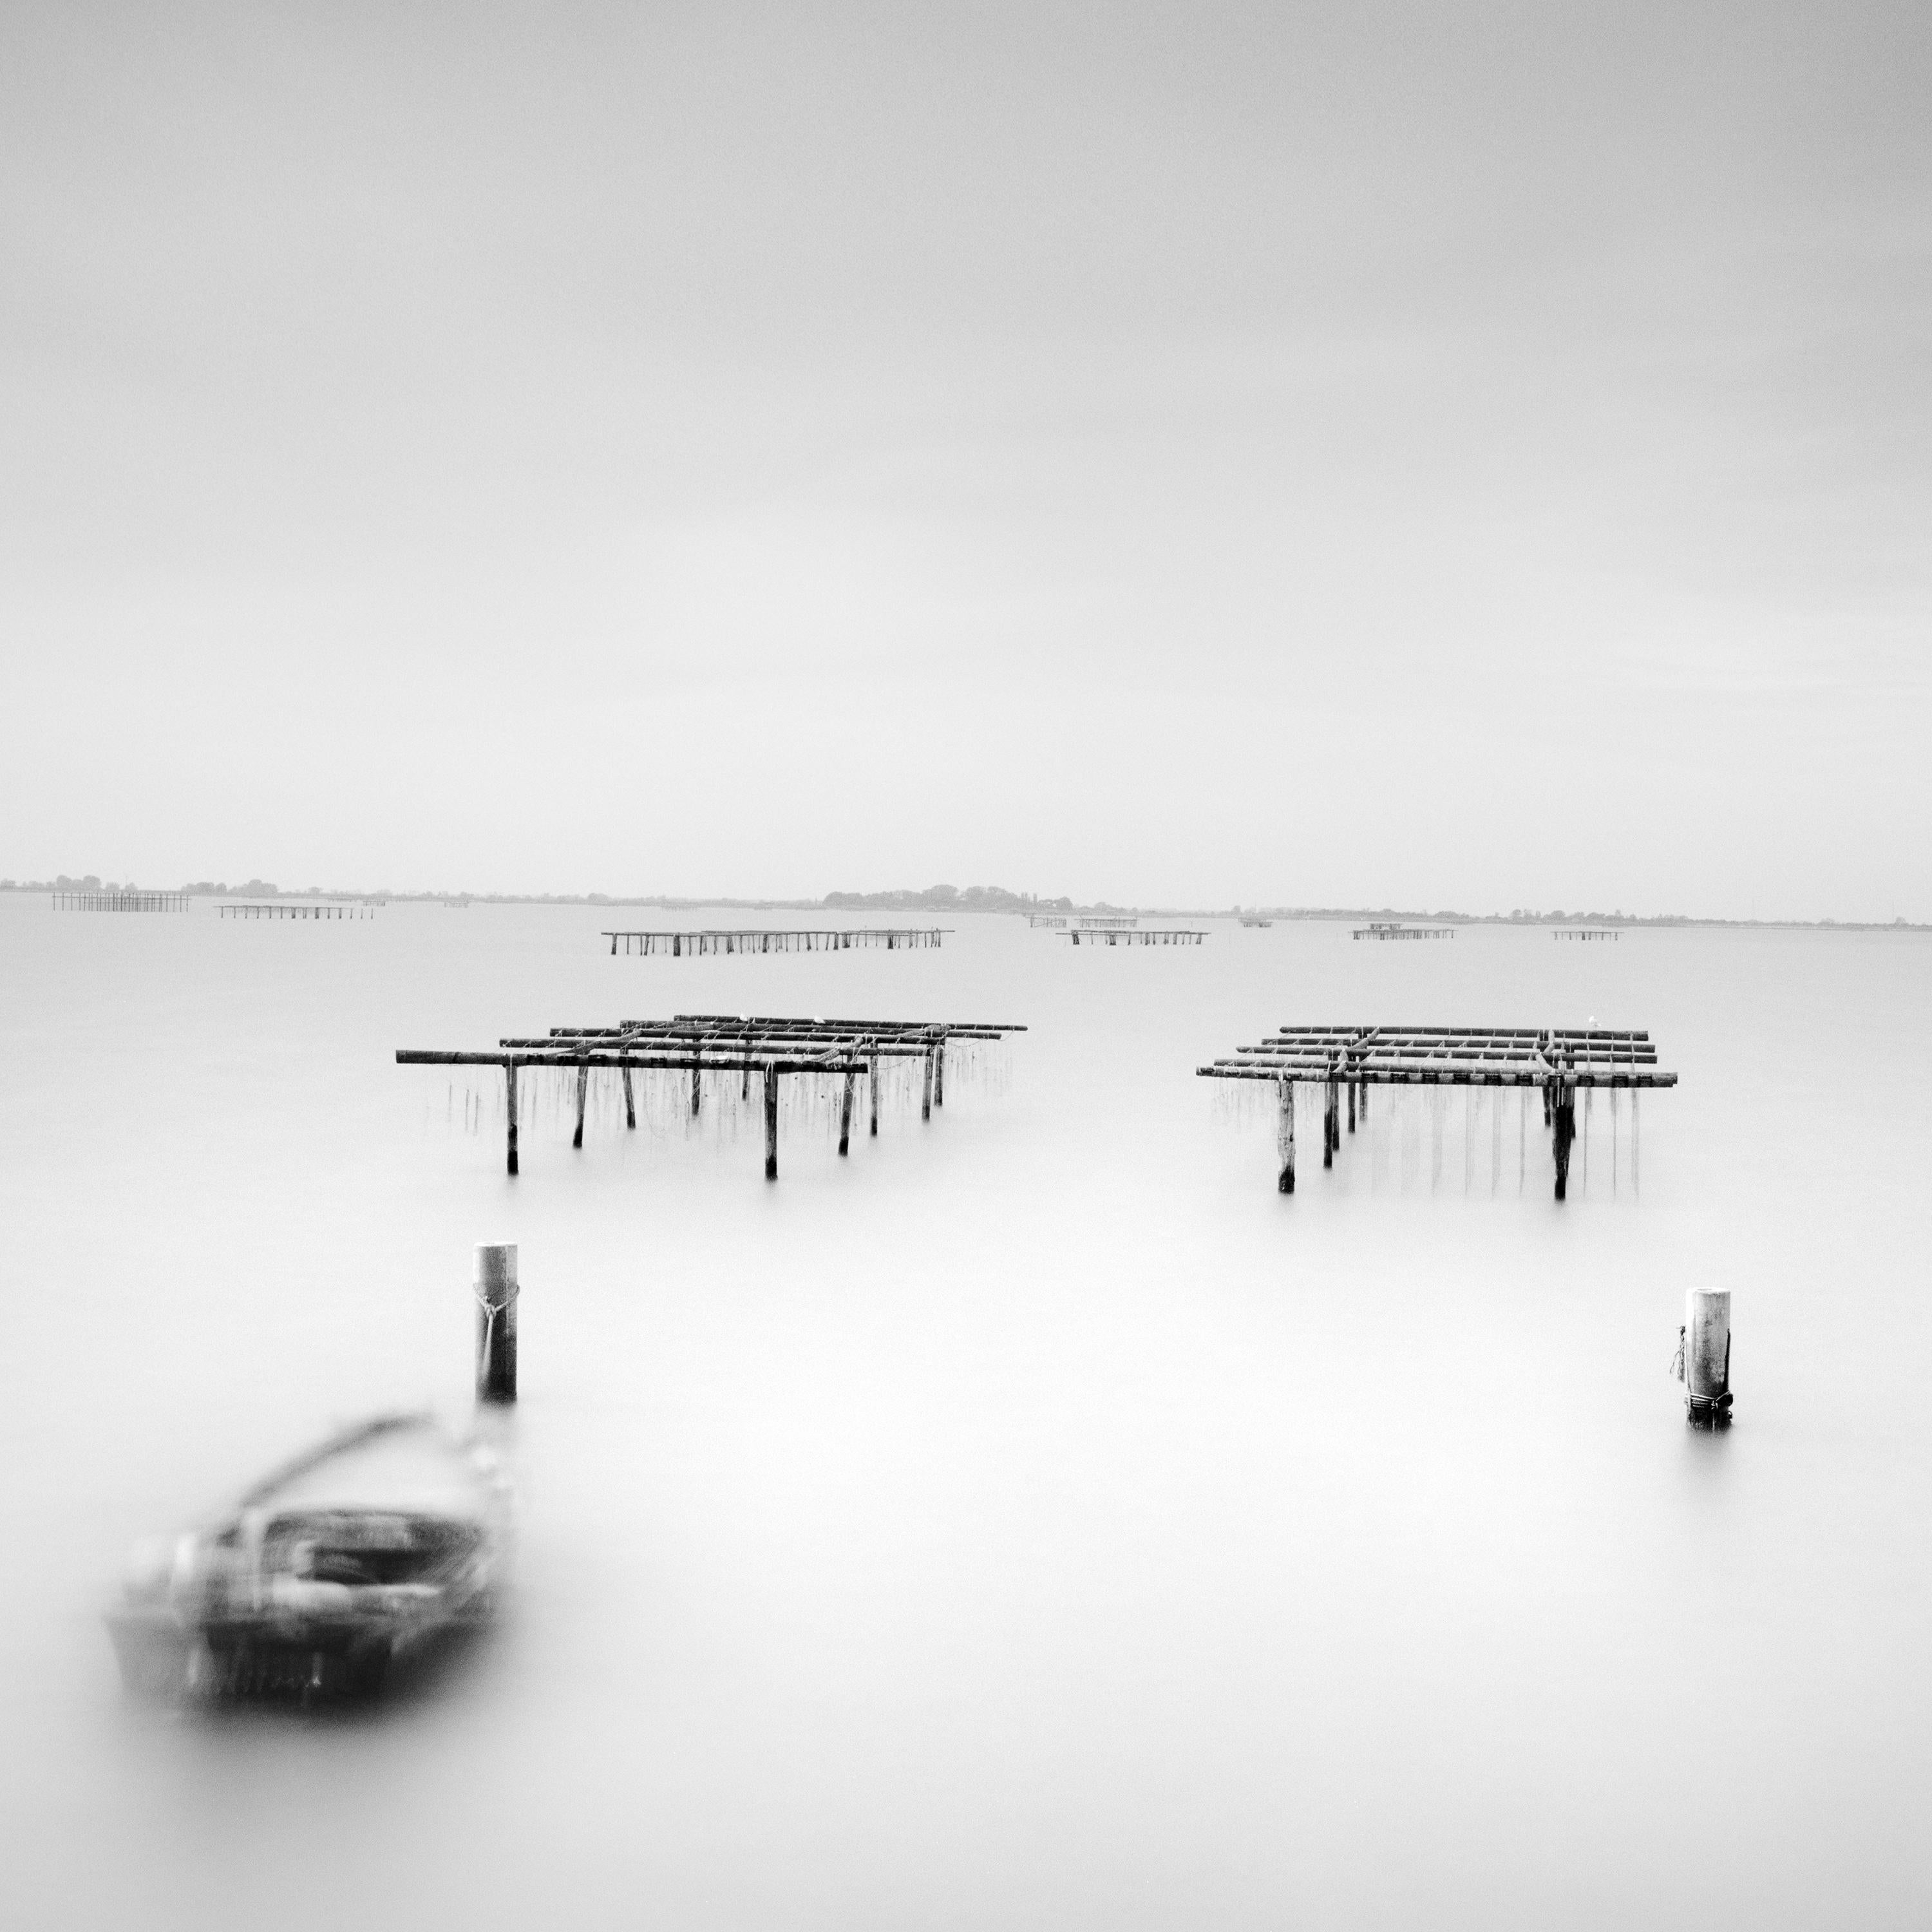 Black and White Fine Art waterscape long exposure photography - Beautiful mussel farm in Po Delta, Italy. Archival pigment ink print, edition of 9. Signed, titled, dated and numbered by artist. Certificate of authenticity included. Printed with 4cm